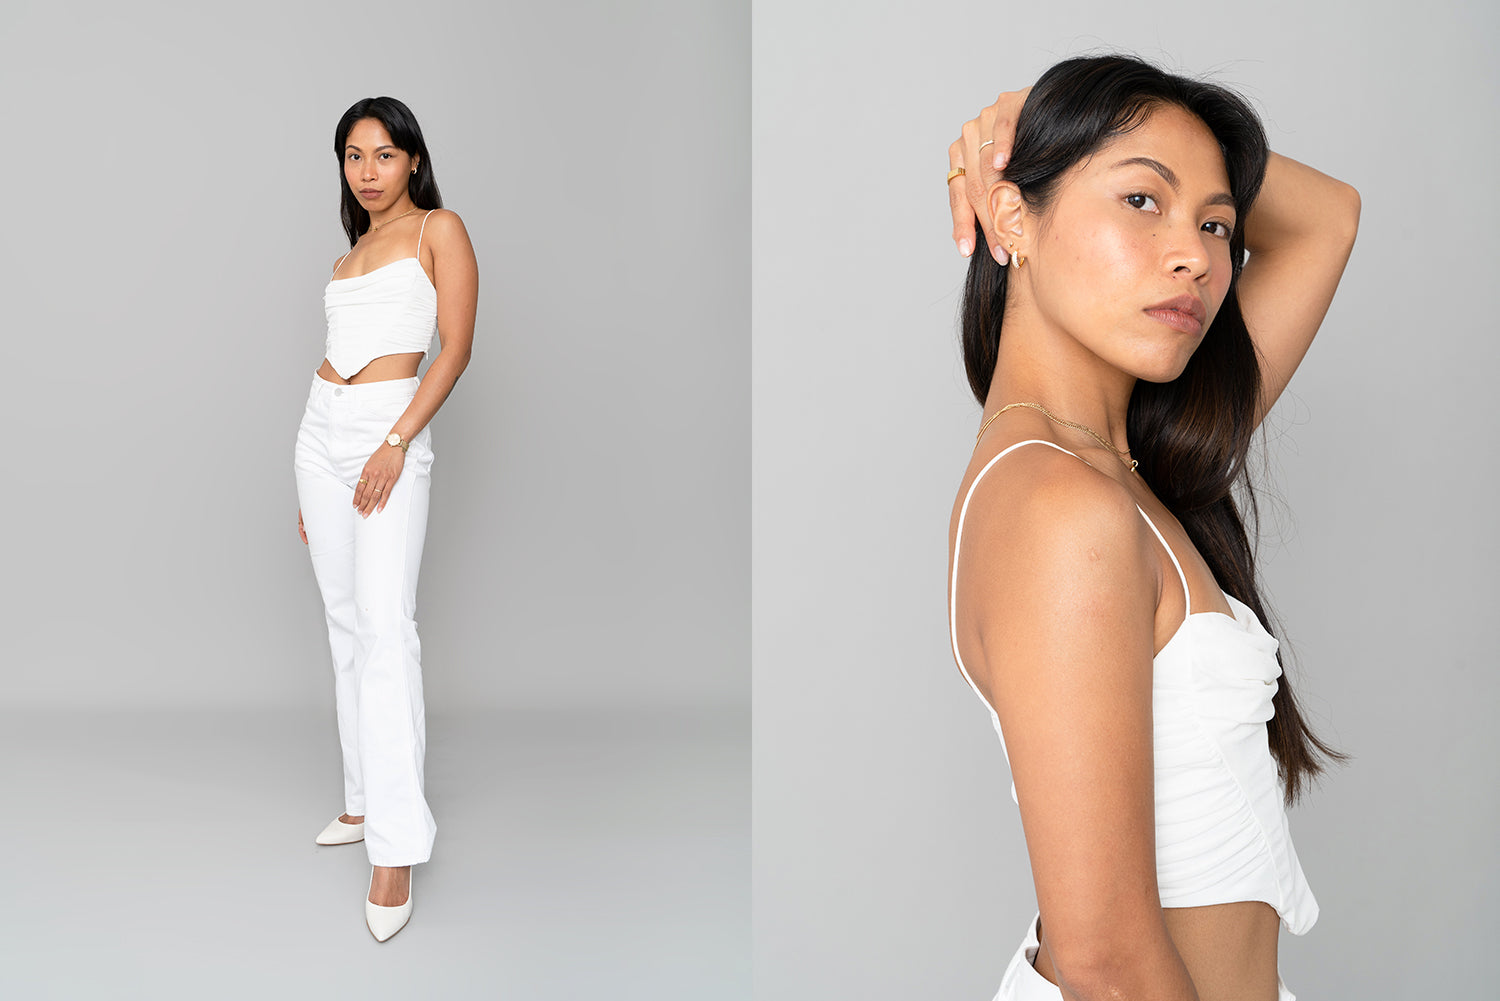 Collage of two fashion images. On the left side, a full-length shot of a confident model in an all-white attire, striking a pose. She exudes poise and style in her ensemble. On the right side, a half-length shot focusing on the model's side view, emphasizing her jawline.